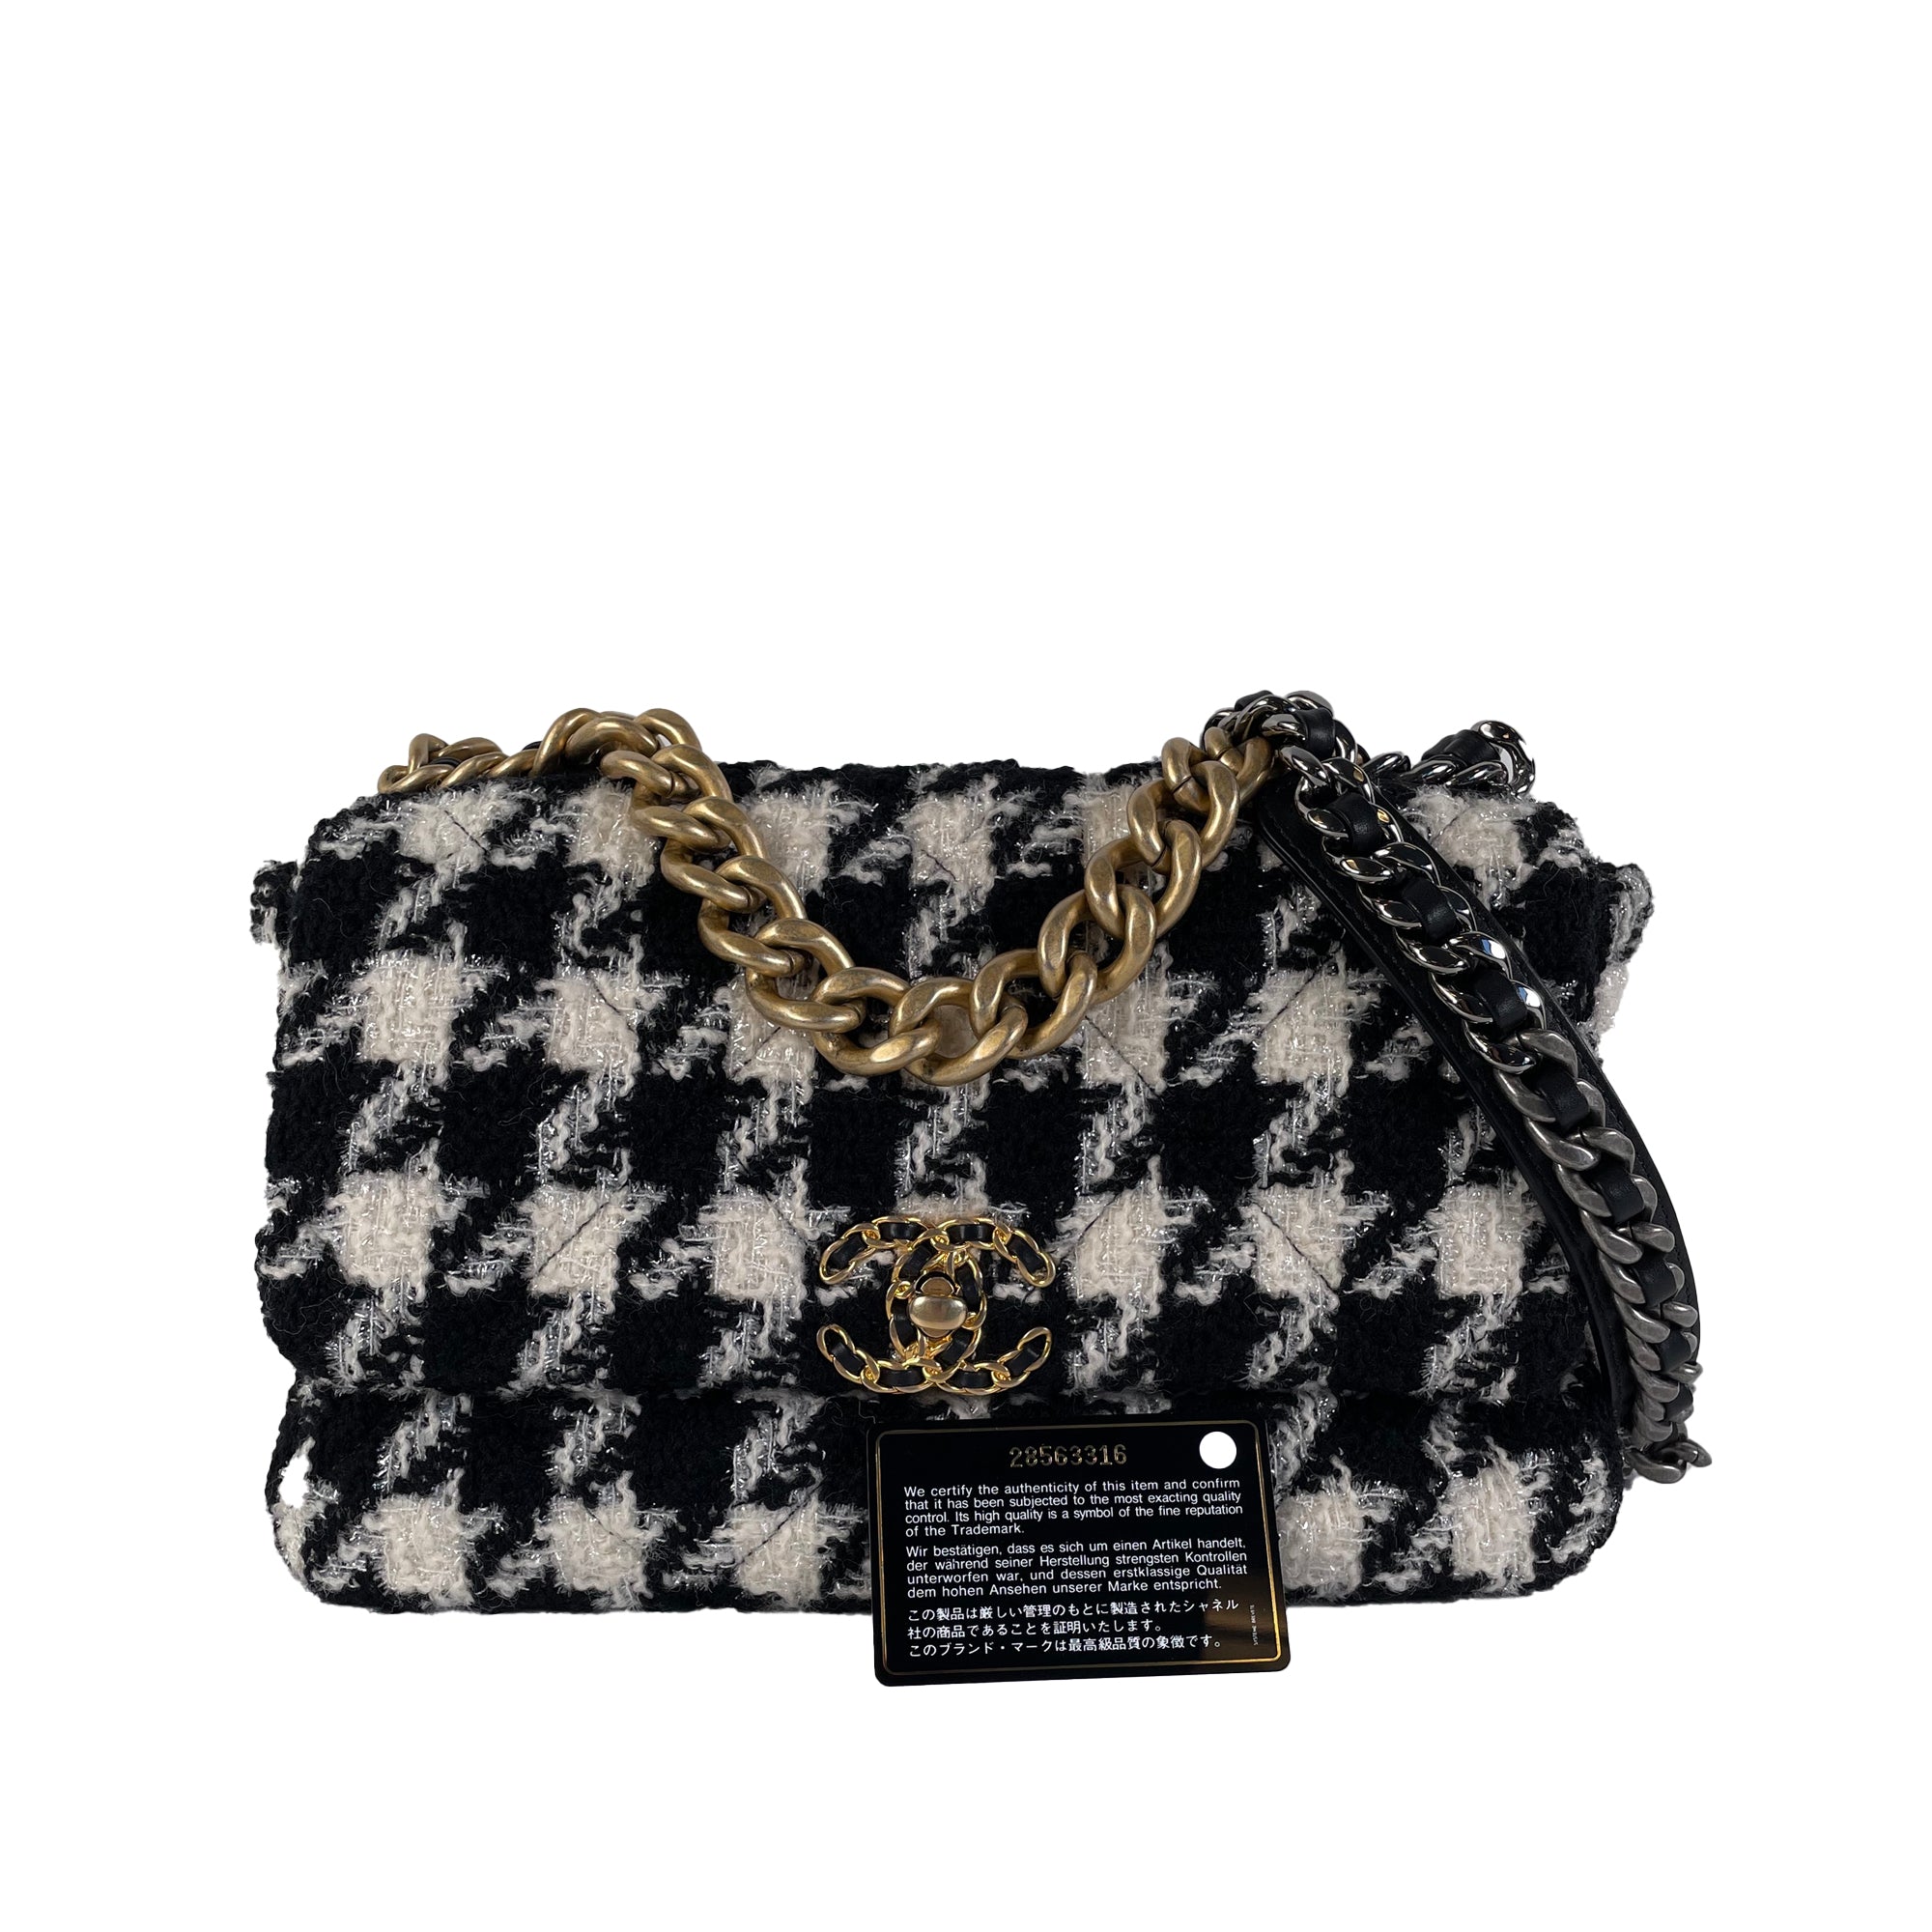 Chanel - Chanel 19 Flap Bag - Small - Ribbon Tweed Monochrome - MHW -  Excellent